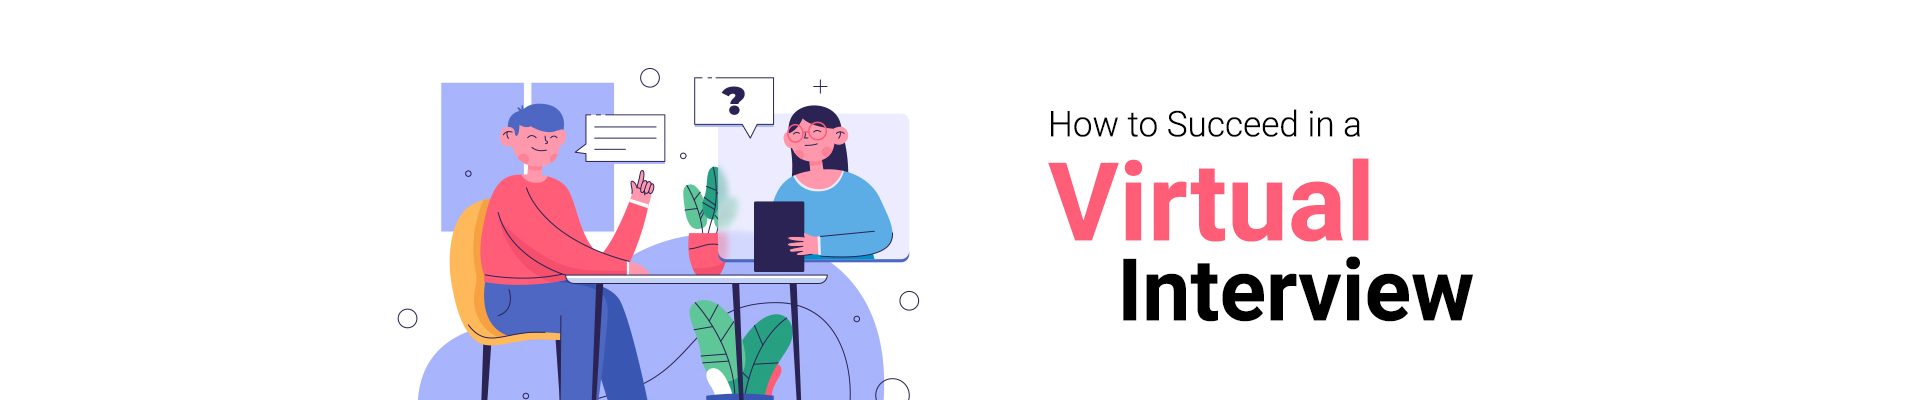 How to Succeed in a Virtual Interview